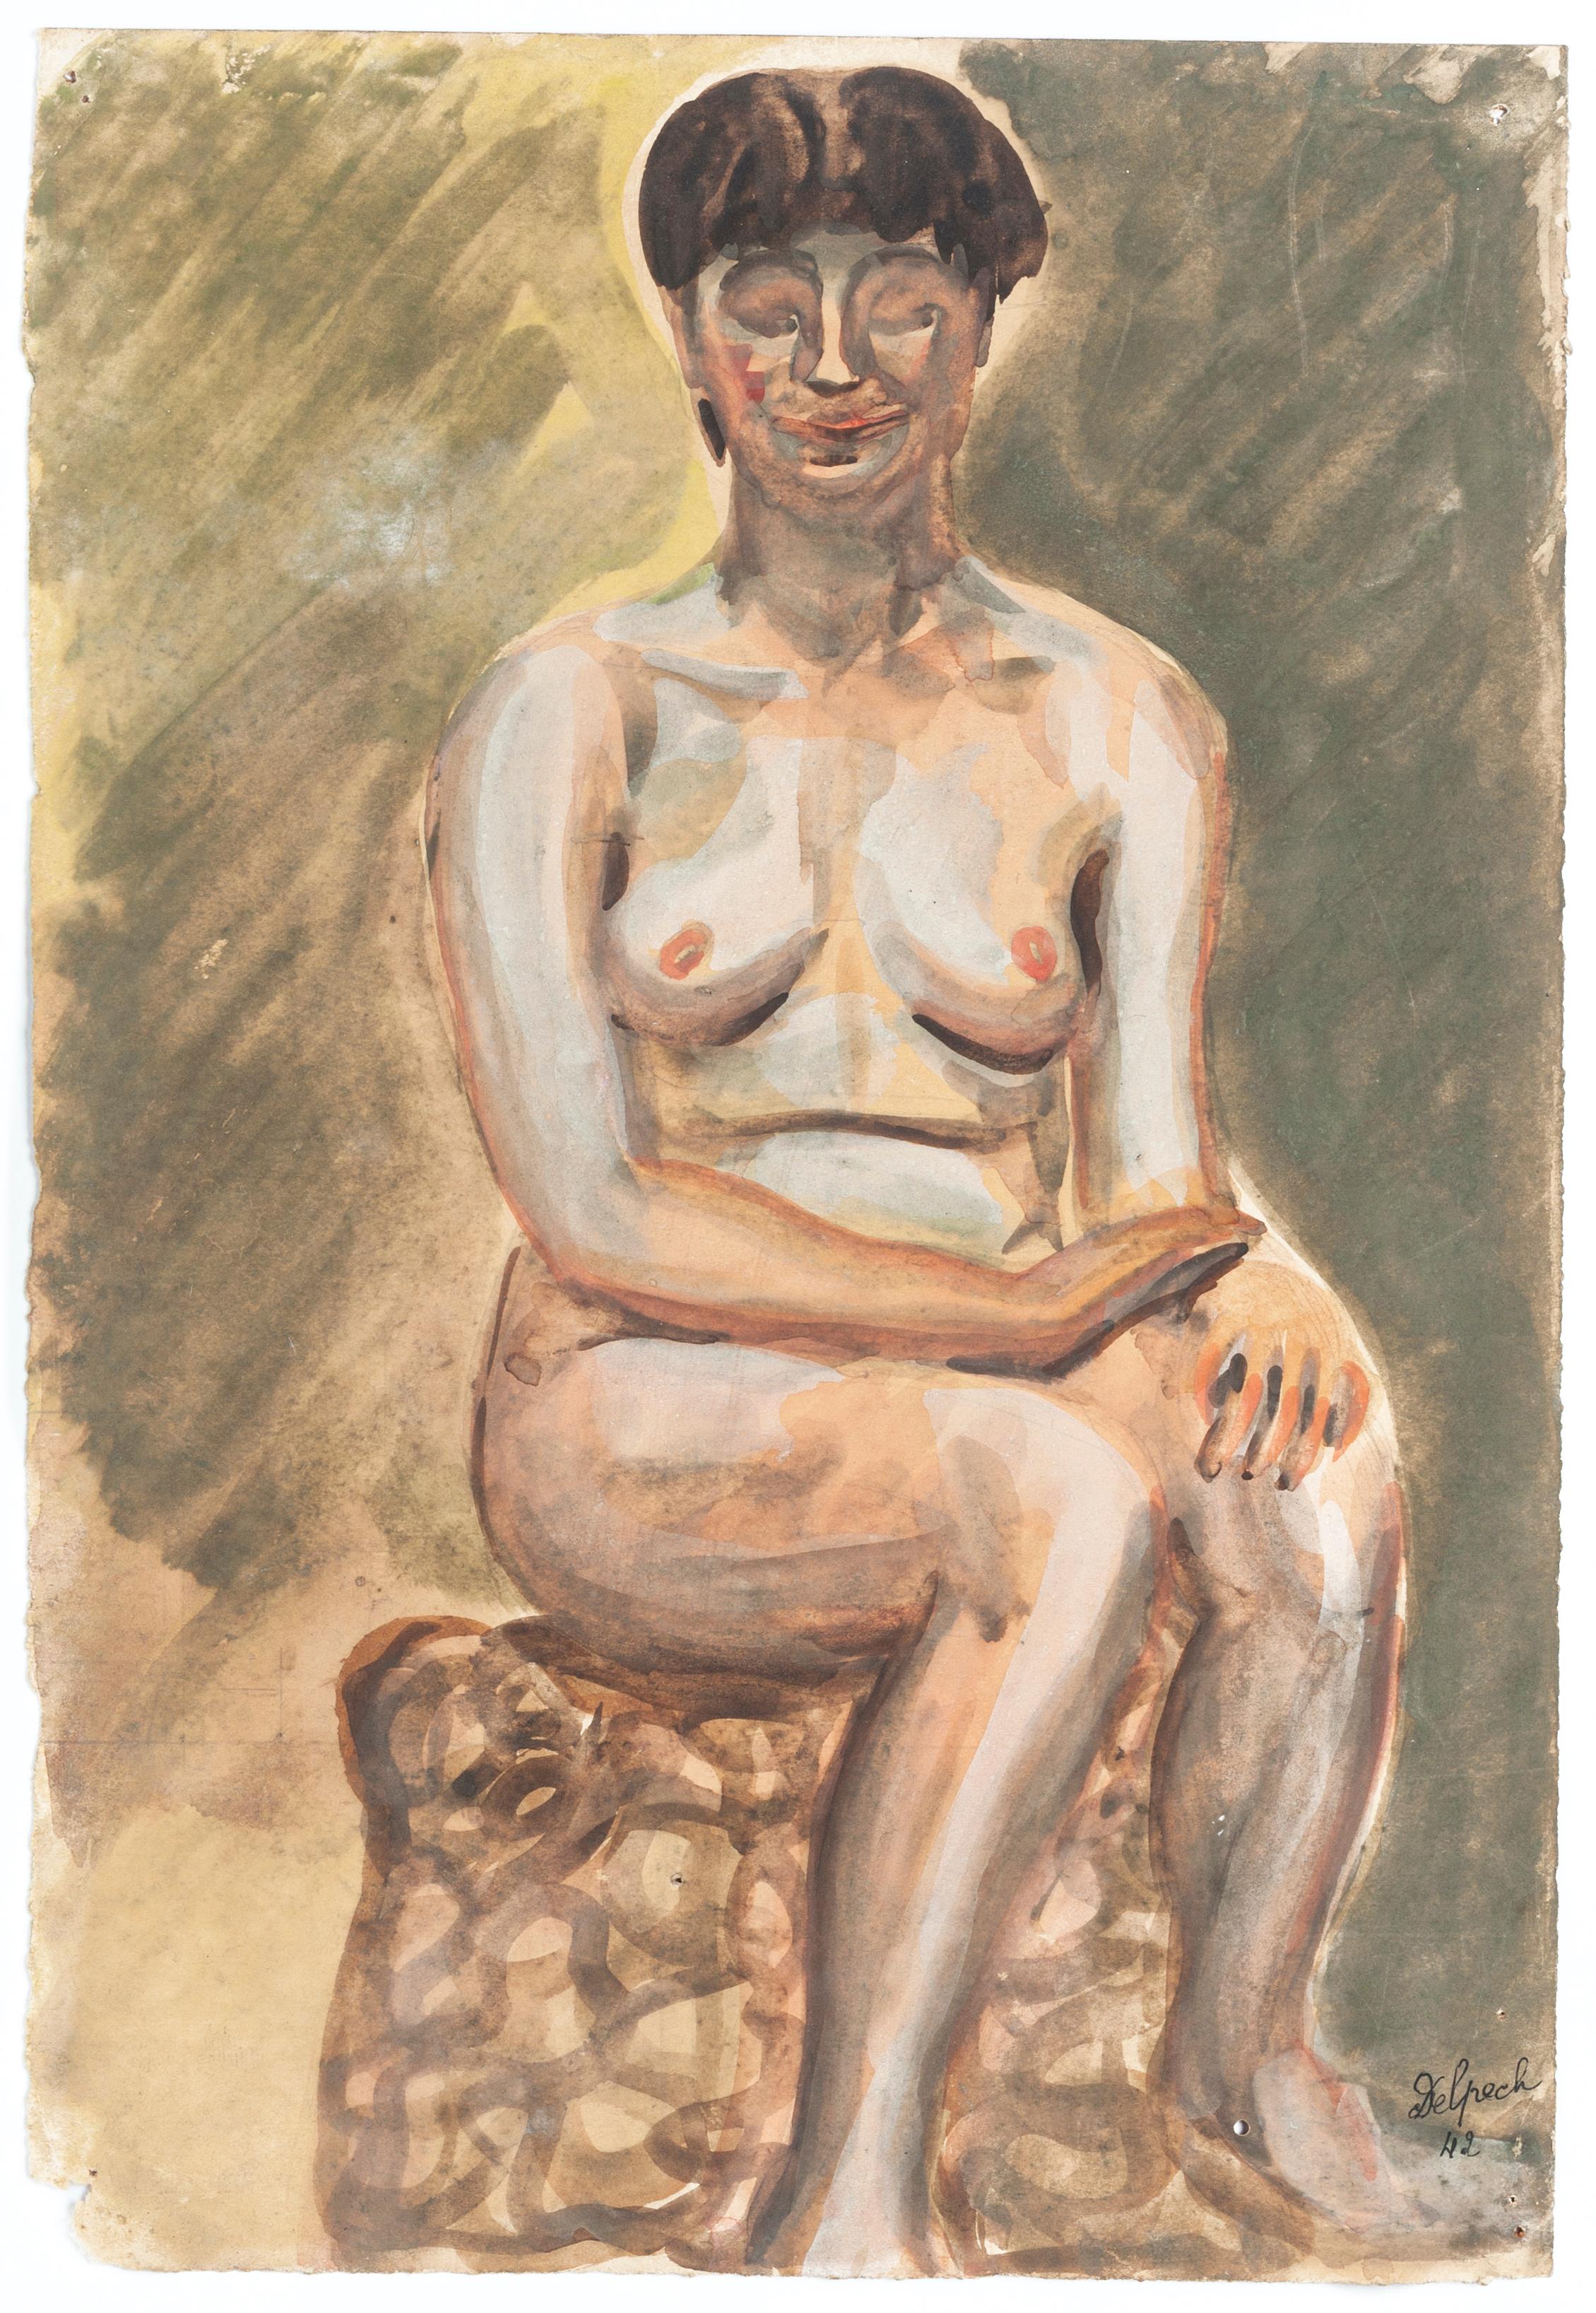 Nude - Mixed Media on Paper by J.-R. Delpech - 1942